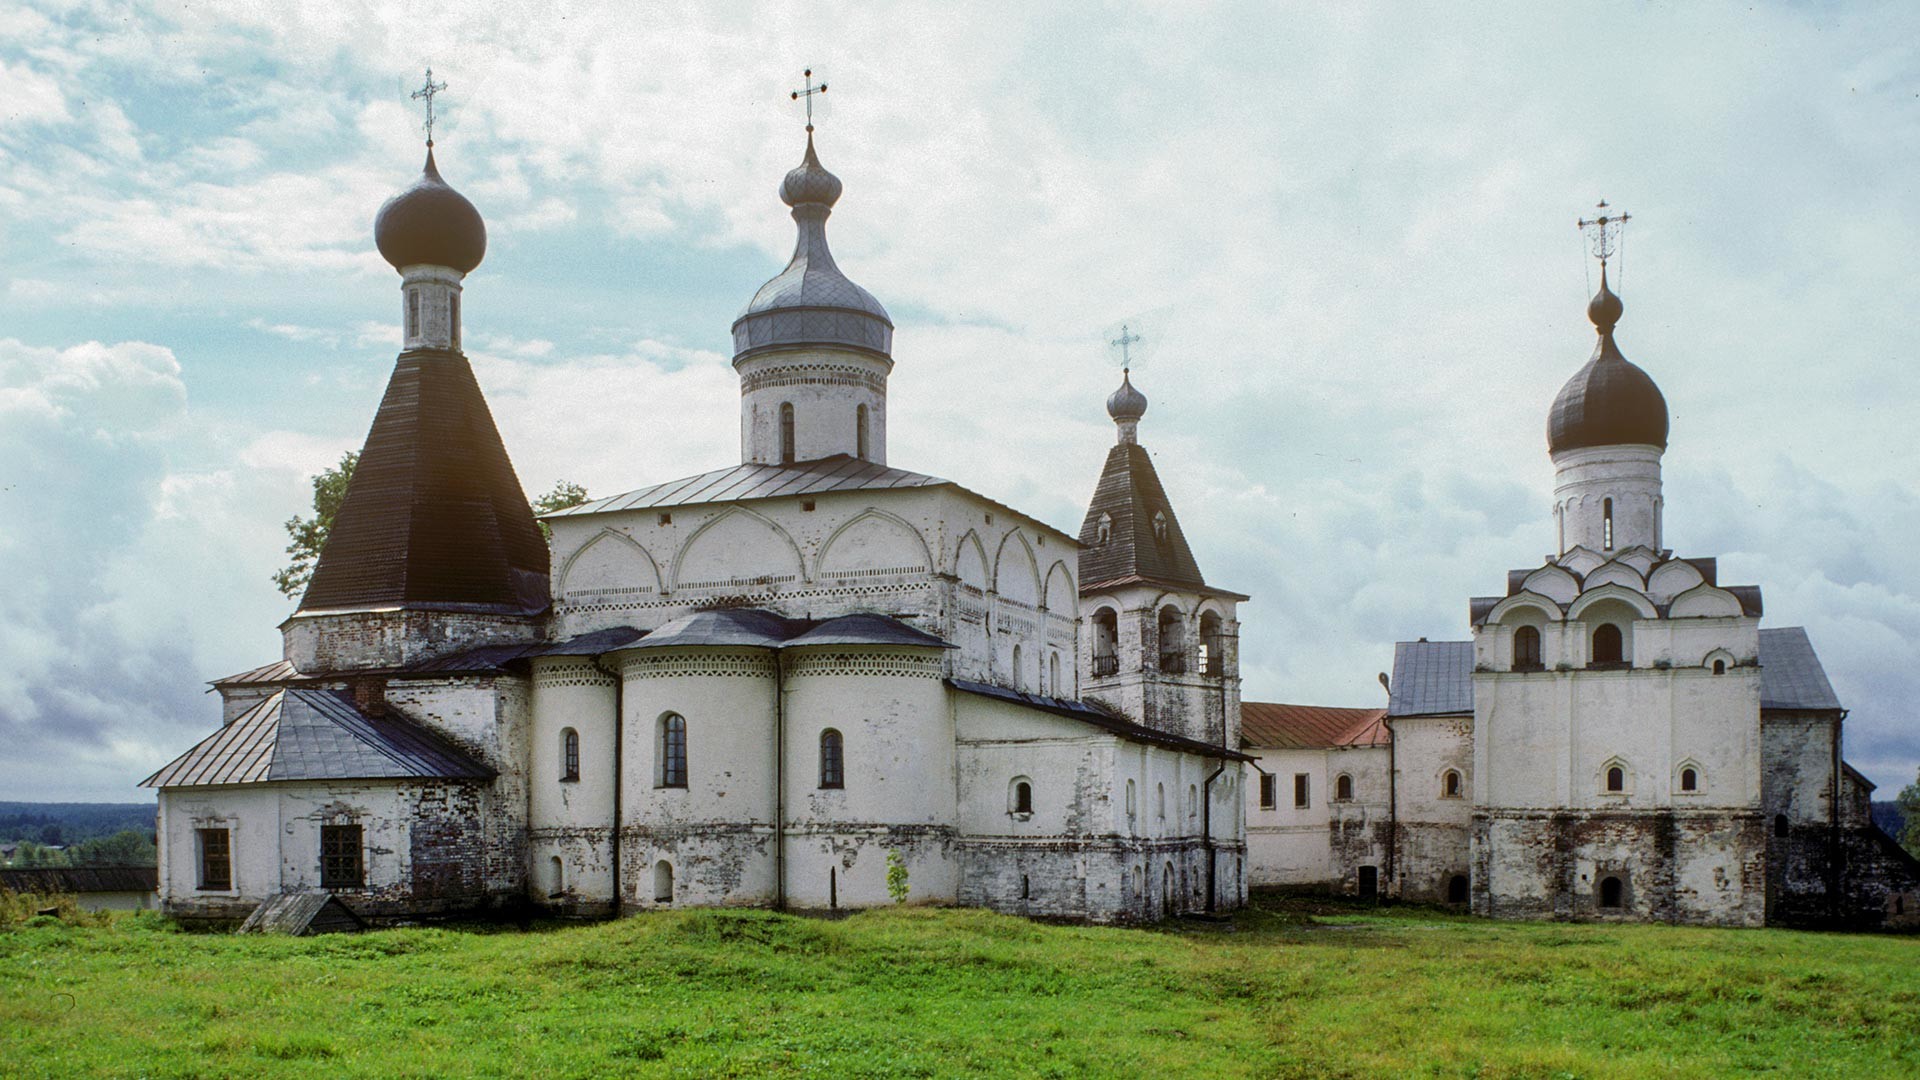 Ferapontov Monastery, east view. From left: Church of St. Martinian, Cathedral of Nativity of the Virgin, bell tower, refectory & Annunciation Church. August 10, 1995